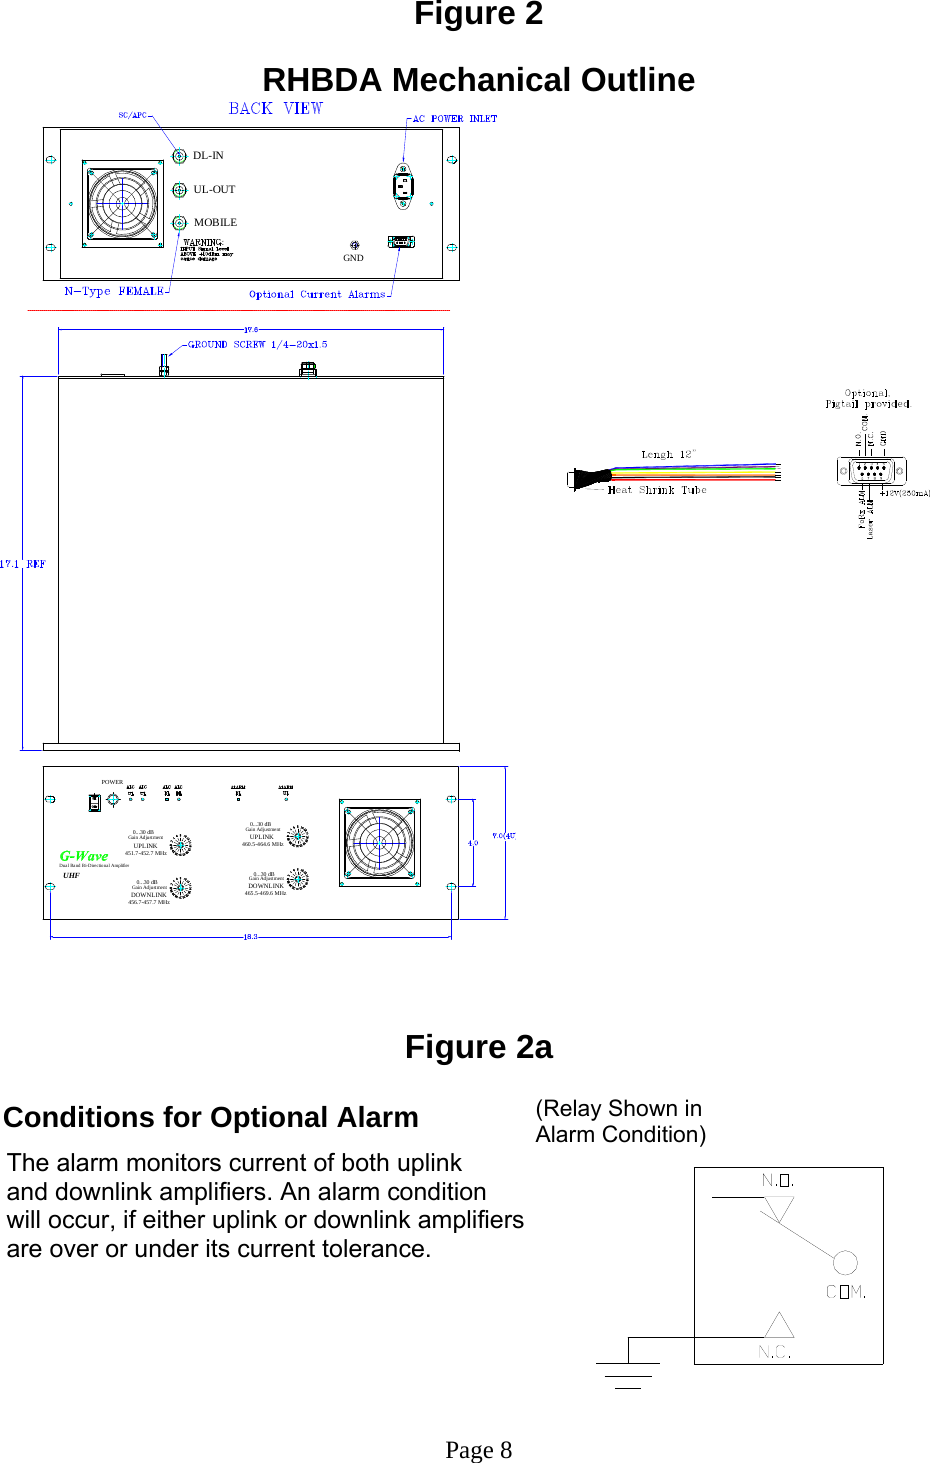 Figure 2  RHBDA Mechanical Outline                   DL-INUL-OUTPOWERGNDMOBILE    0...30 dBGain AdjustmentUPLINK460.5-464.6 MHz    0...30 dBGain AdjustmentDOWNLINK465.5-469.6 MHz    0...30 dBGain AdjustmentUPLINK451.7-452.7 MHz    0...30 dBGain AdjustmentDOWNLINK456.7-457.7 MHzDual Band Bi-Directional AmplifierUHF  Figure 2a   (Relay Shown in         Alarm Condition) The alarm monitors current of both uplink Conditions for Optional Alarm and downlink amplifiers. An alarm condition                                                             will occur, if either uplink or downlink amplifiers                                               are over or under its current tolerance.                                                                                             Page 8 